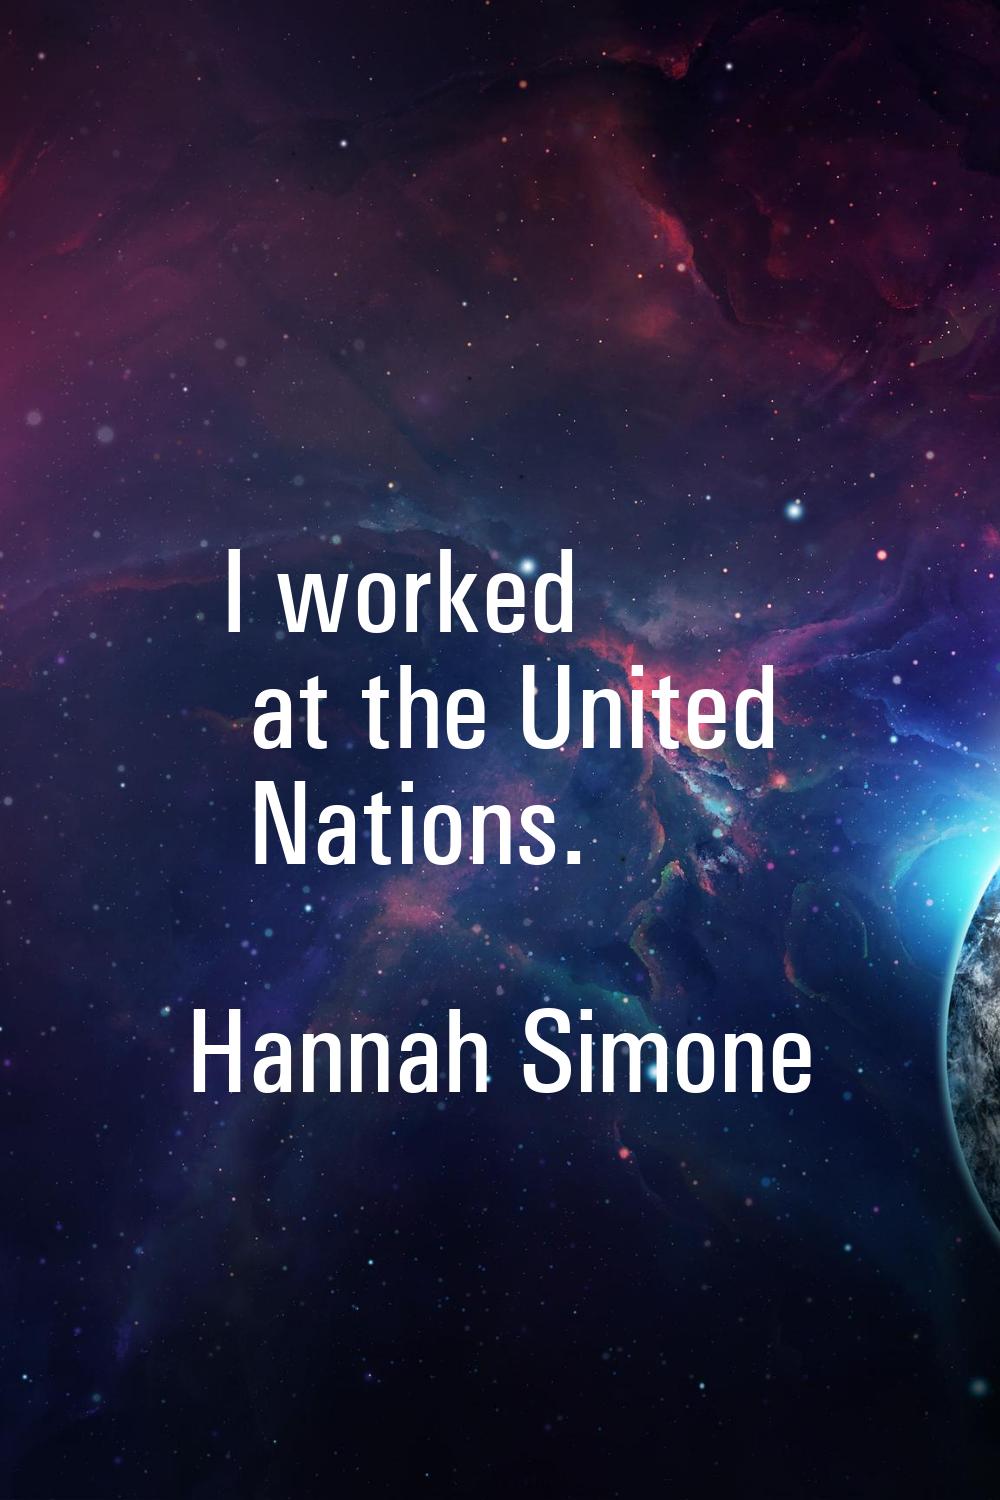 I worked at the United Nations.